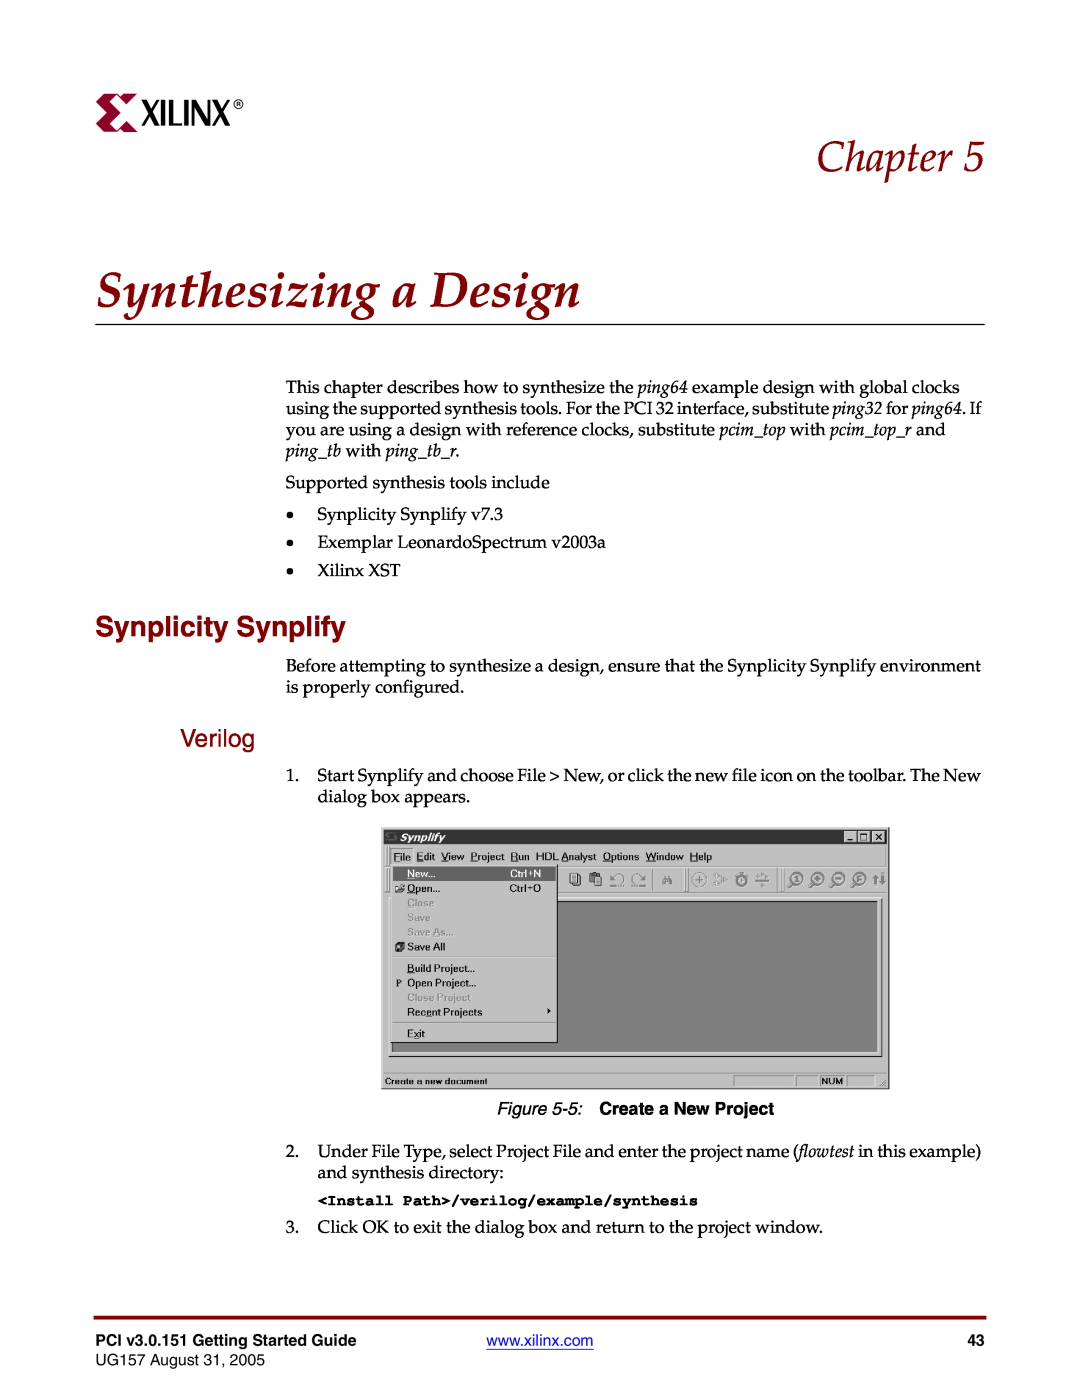 Xilinx PCI v3.0 manual Synthesizing a Design, Synplicity Synplify, 5 Create a New Project, Chapter, Verilog 